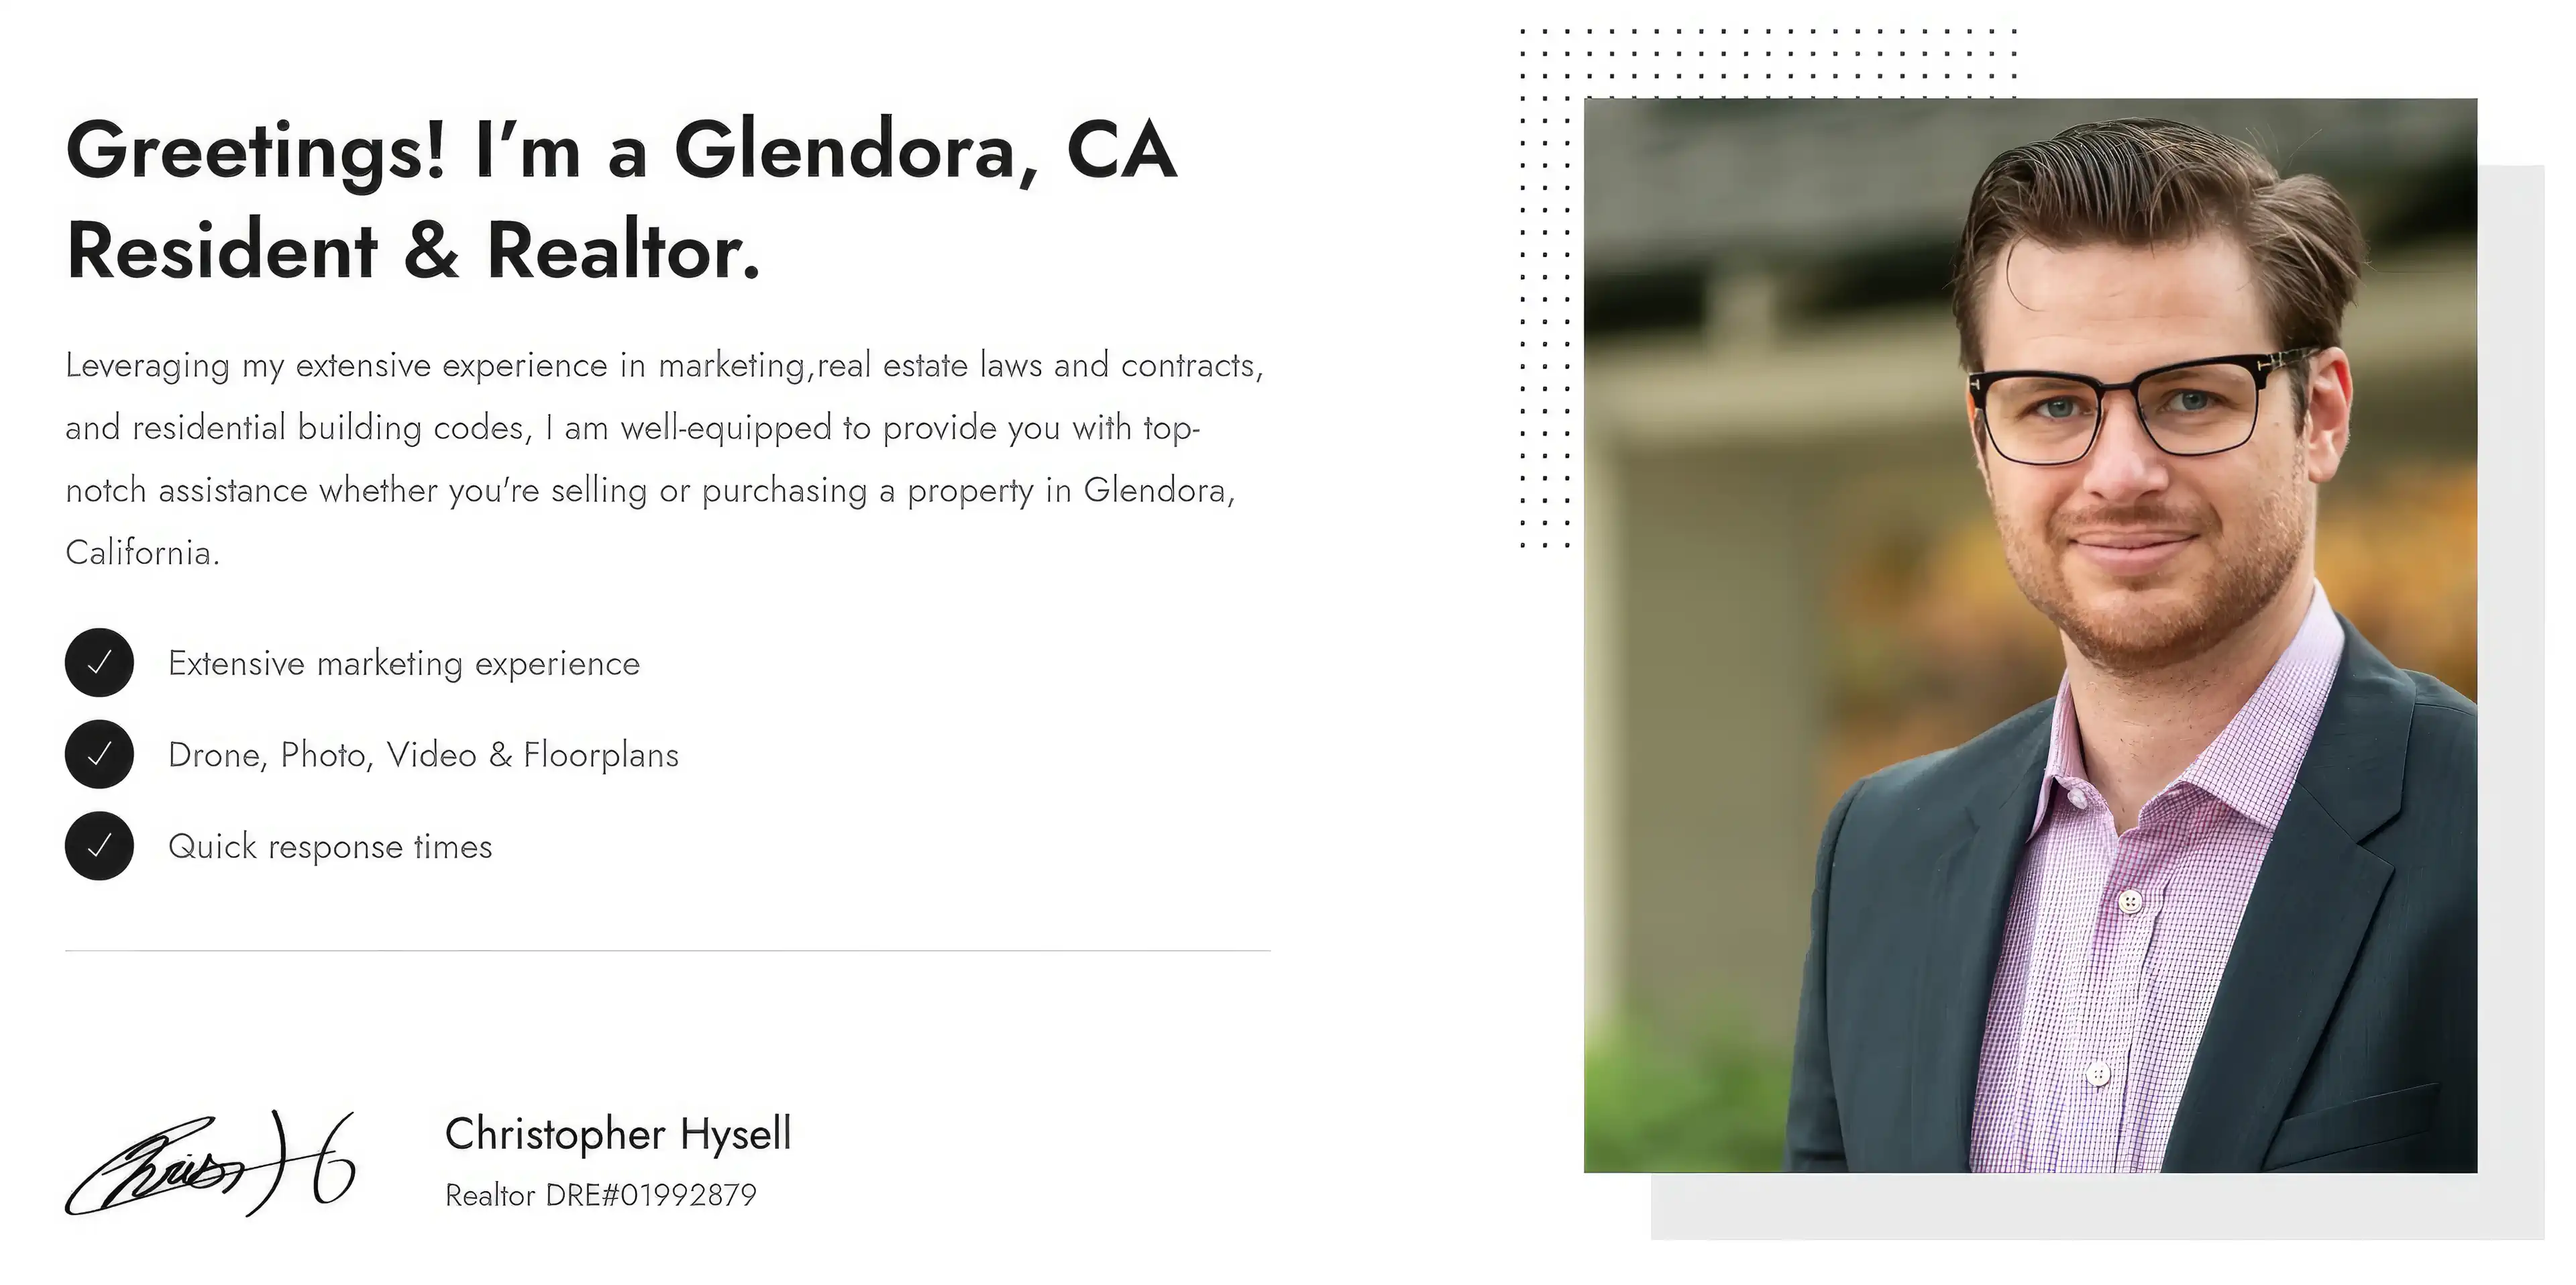 Christopher Hysell, professional Glendora realtor, smiling and posing for a portrait